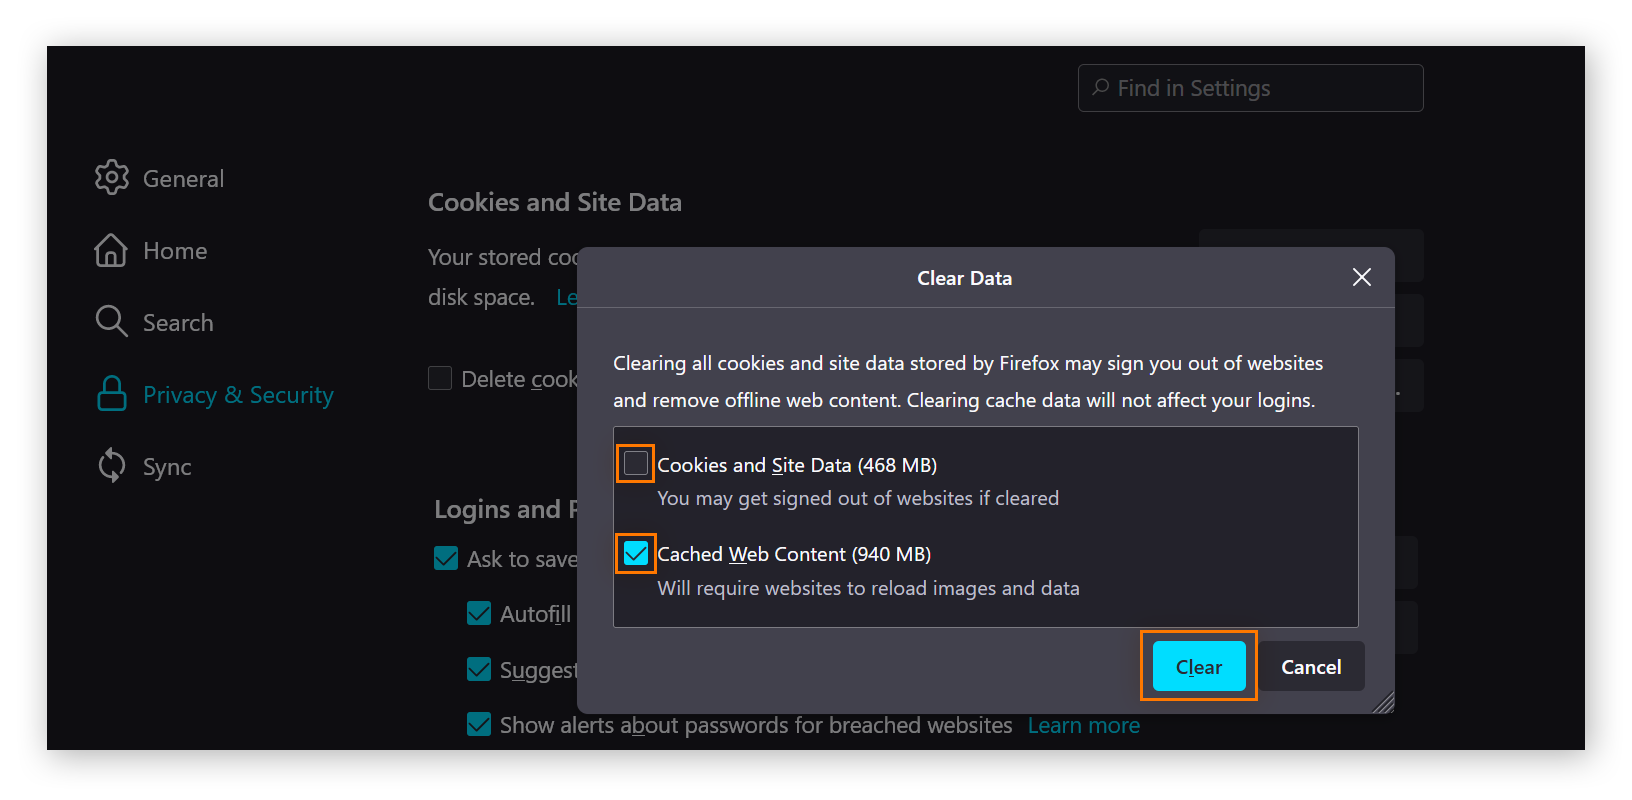 A window confirming that the user would like to clear data The option "Cookies and site data" is unchecked, while the option "Cached web content" is checked.